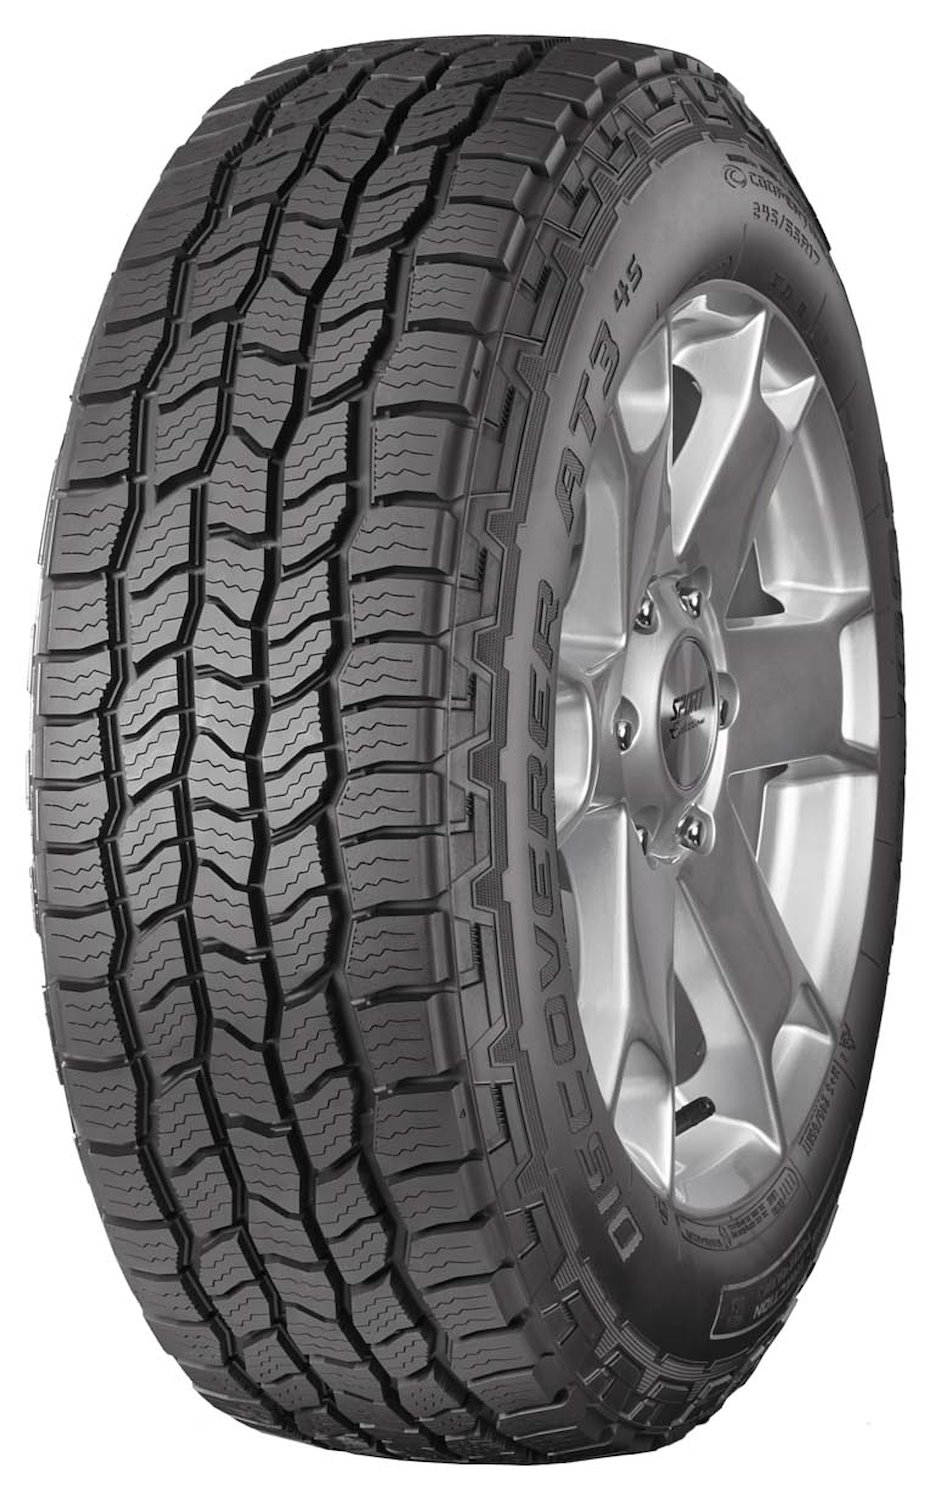 Discoverer AT3 4S All-Terrain Tire, 265/65R17